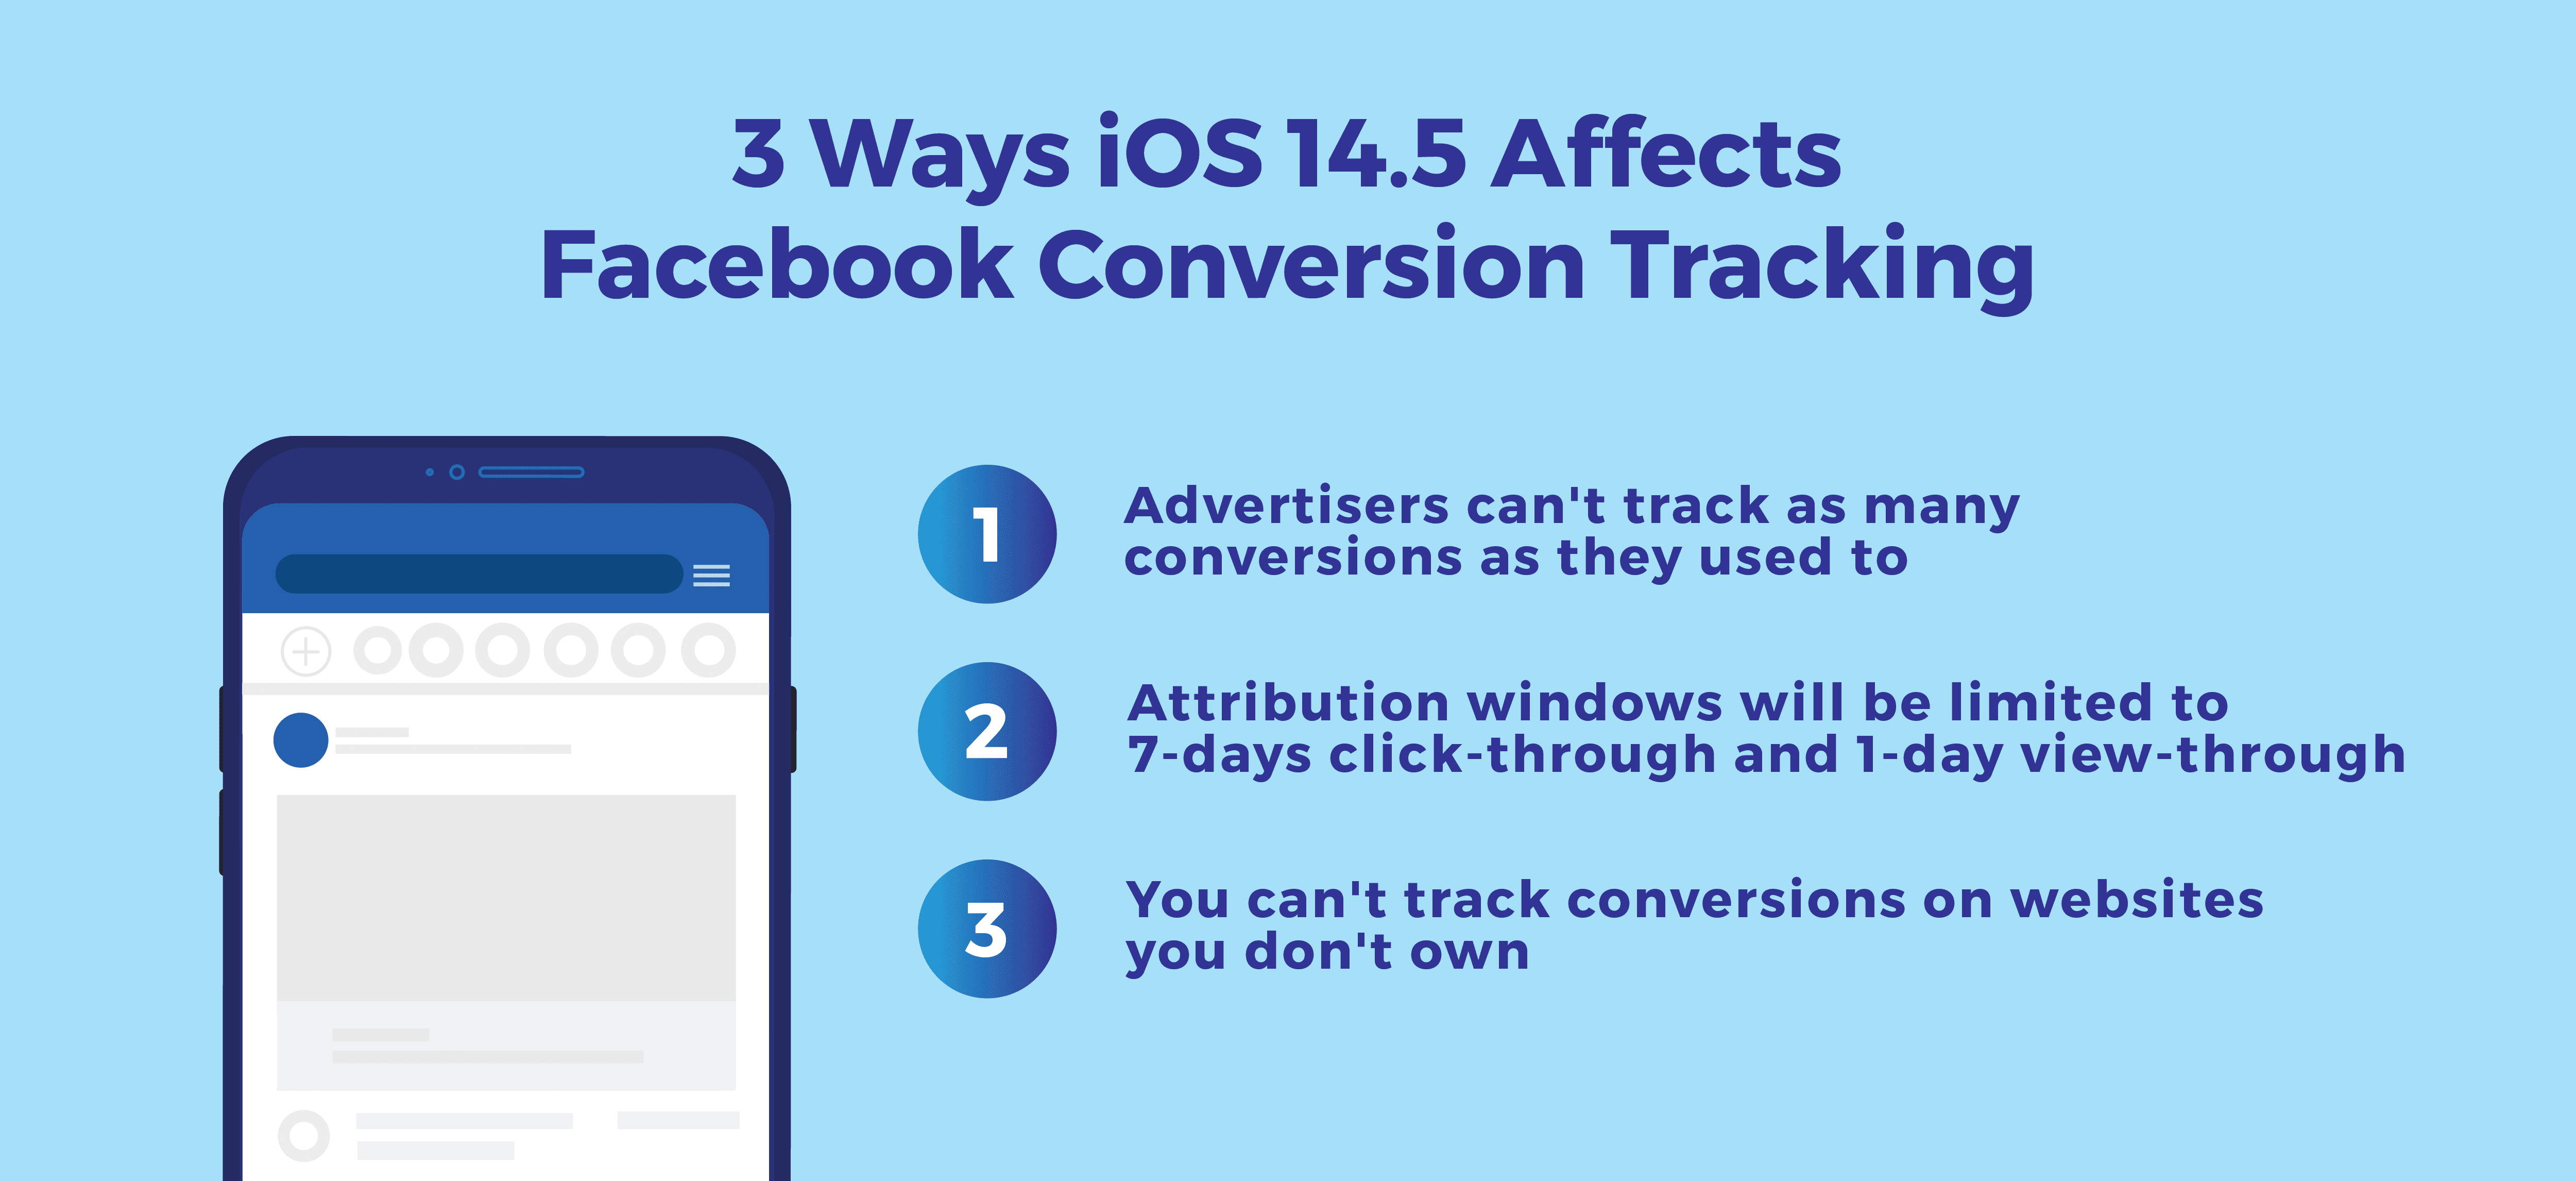 3 Ways iOS 14.5 will affect Facebook Conversion Tracking